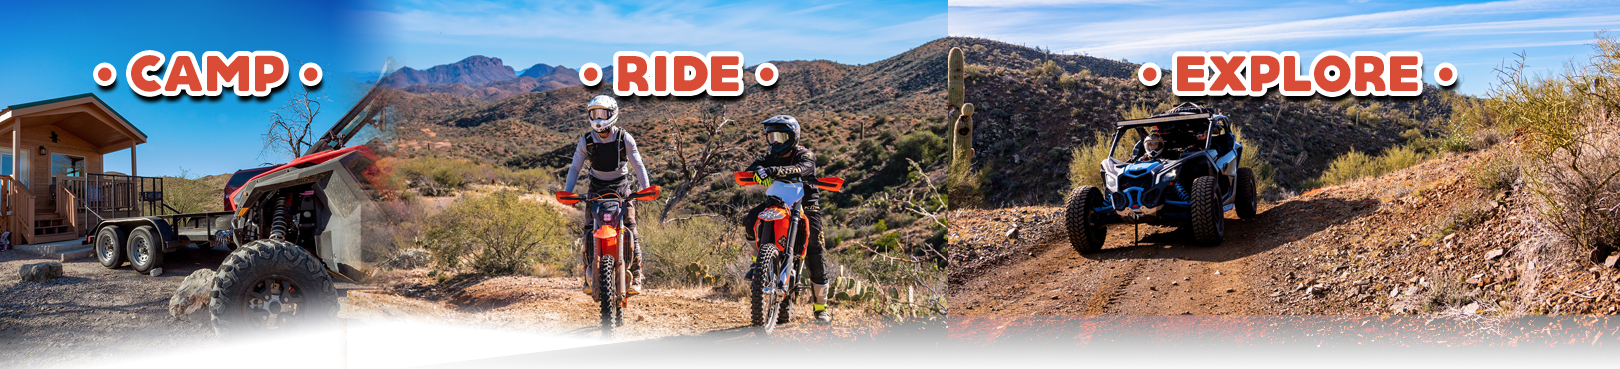 Camp, ride and explore banner showinng motorized trail uses